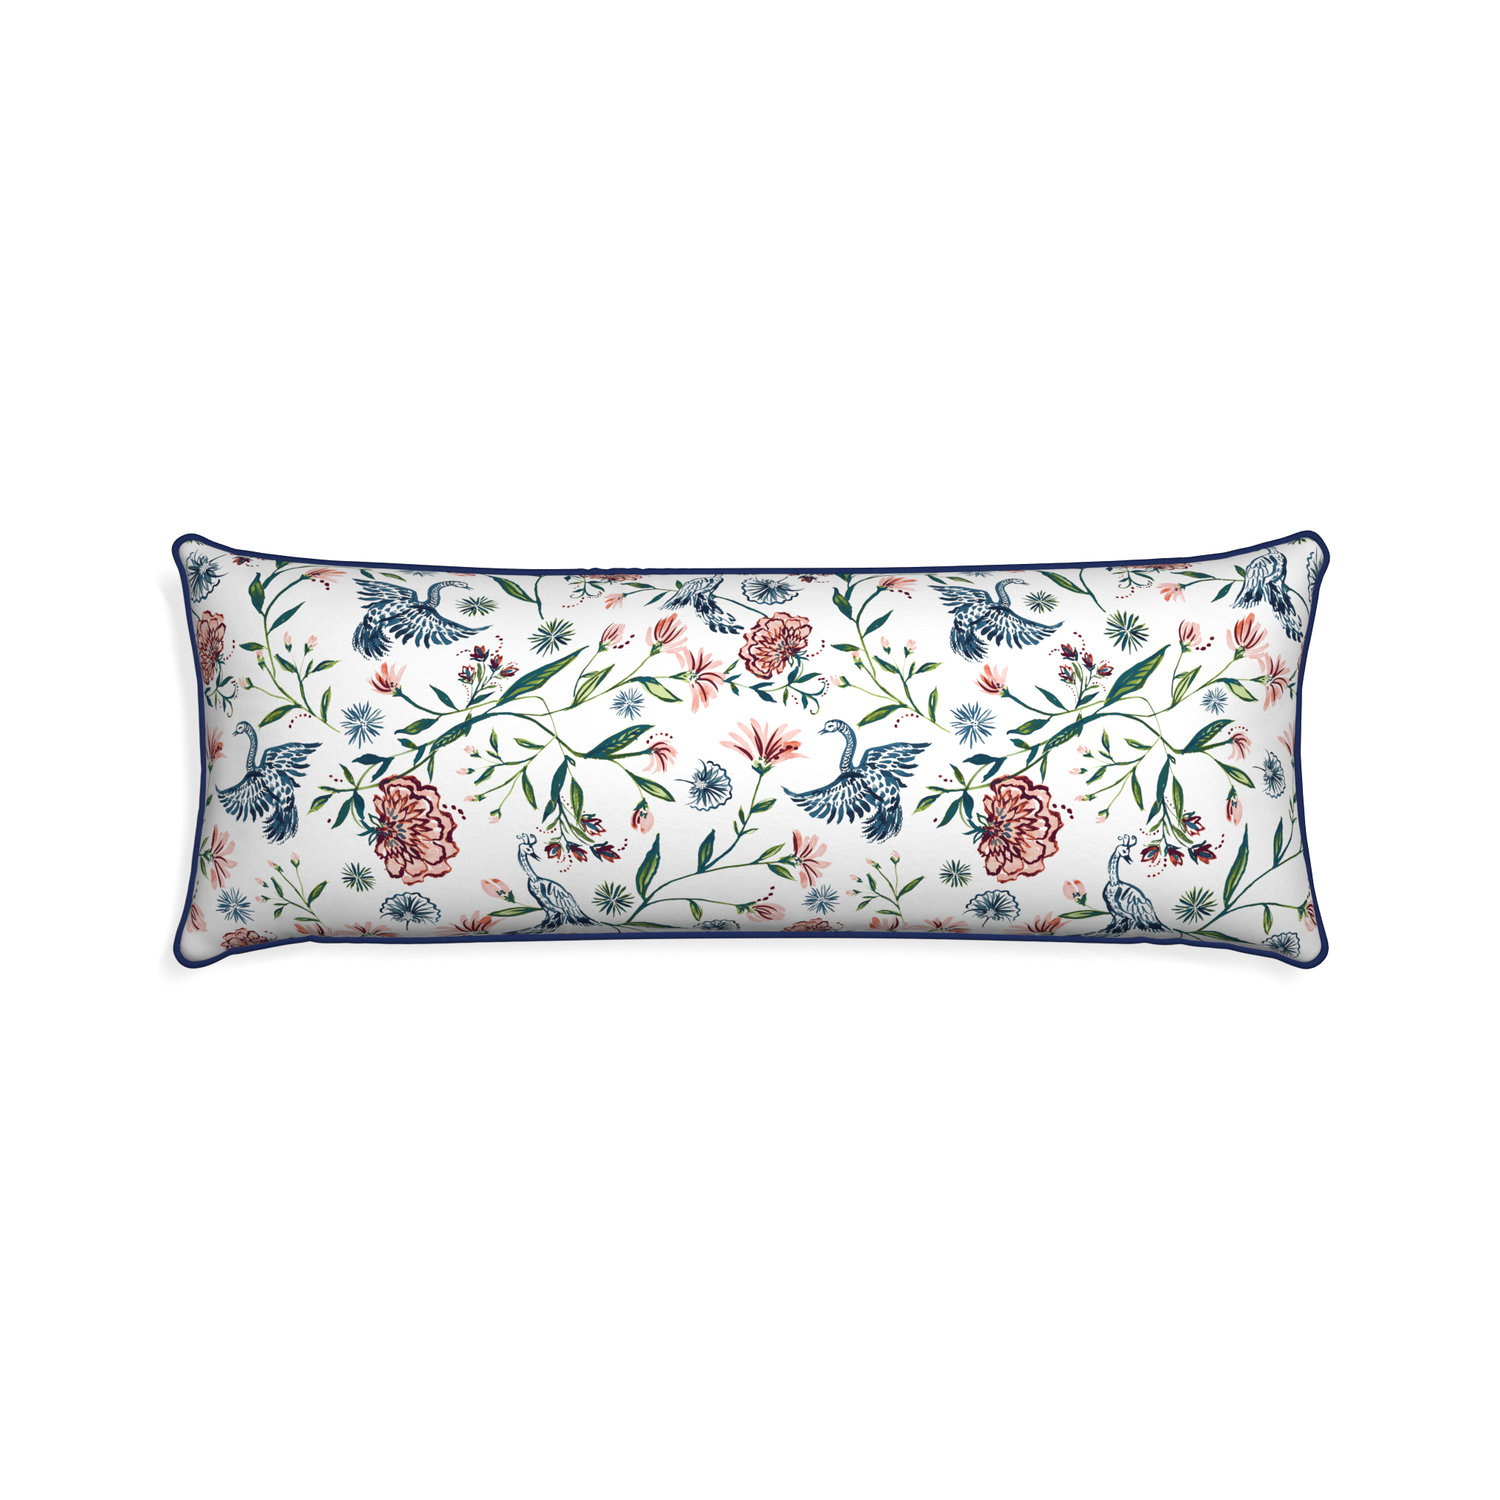 Xl-lumbar daphne cream custom pillow with midnight piping on white background